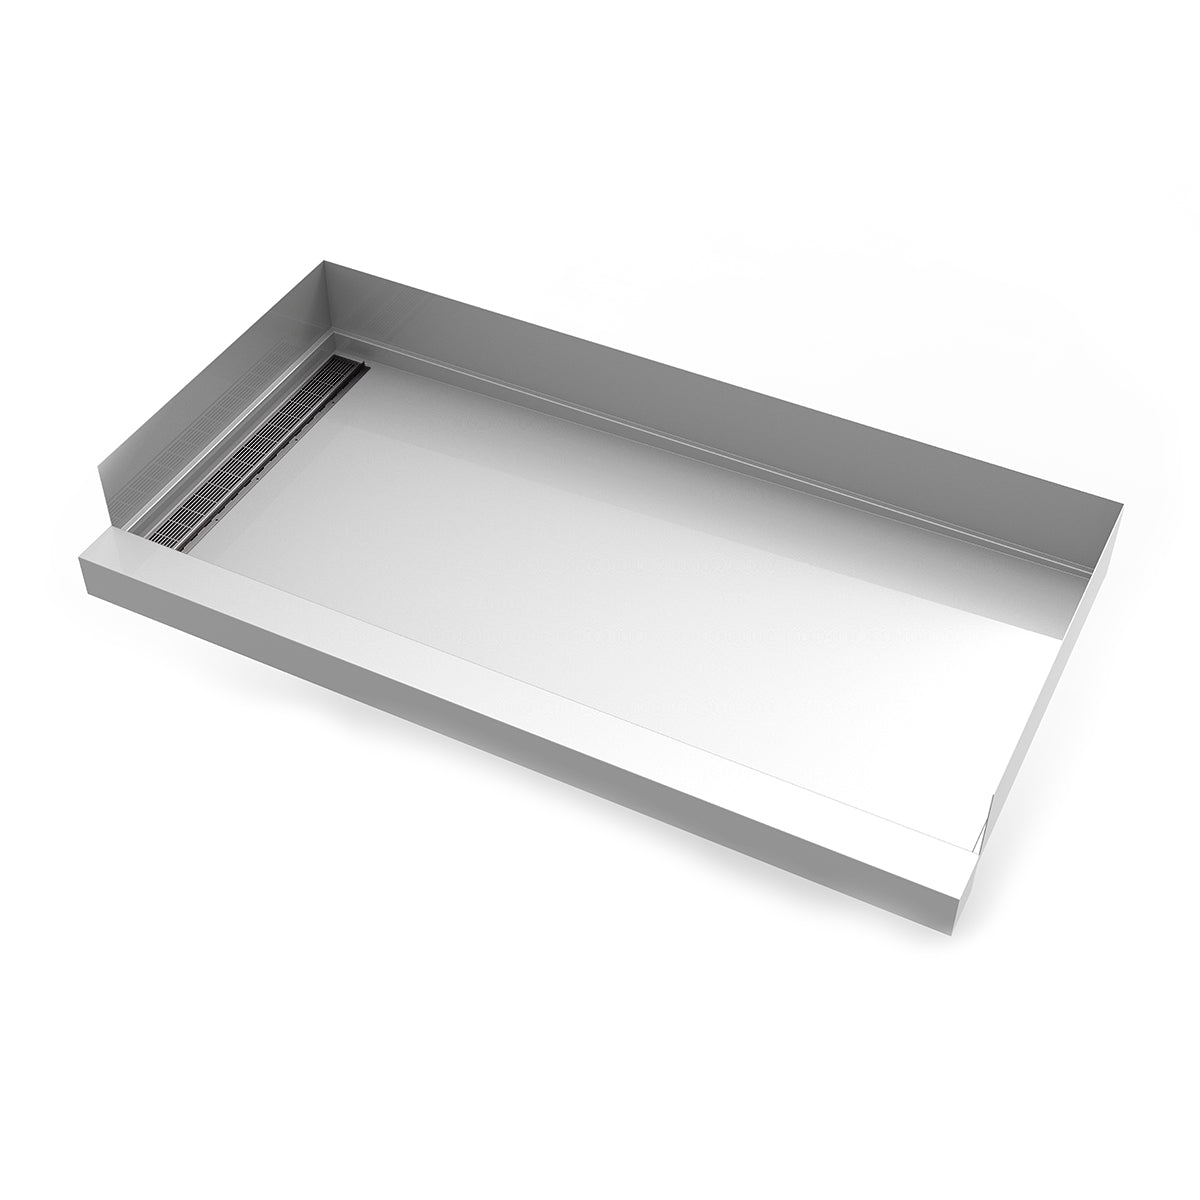 Infinity Drain 30"x 60" Stainless Steel Shower Base with Left Wall Slotted Pattern Linear Drain location